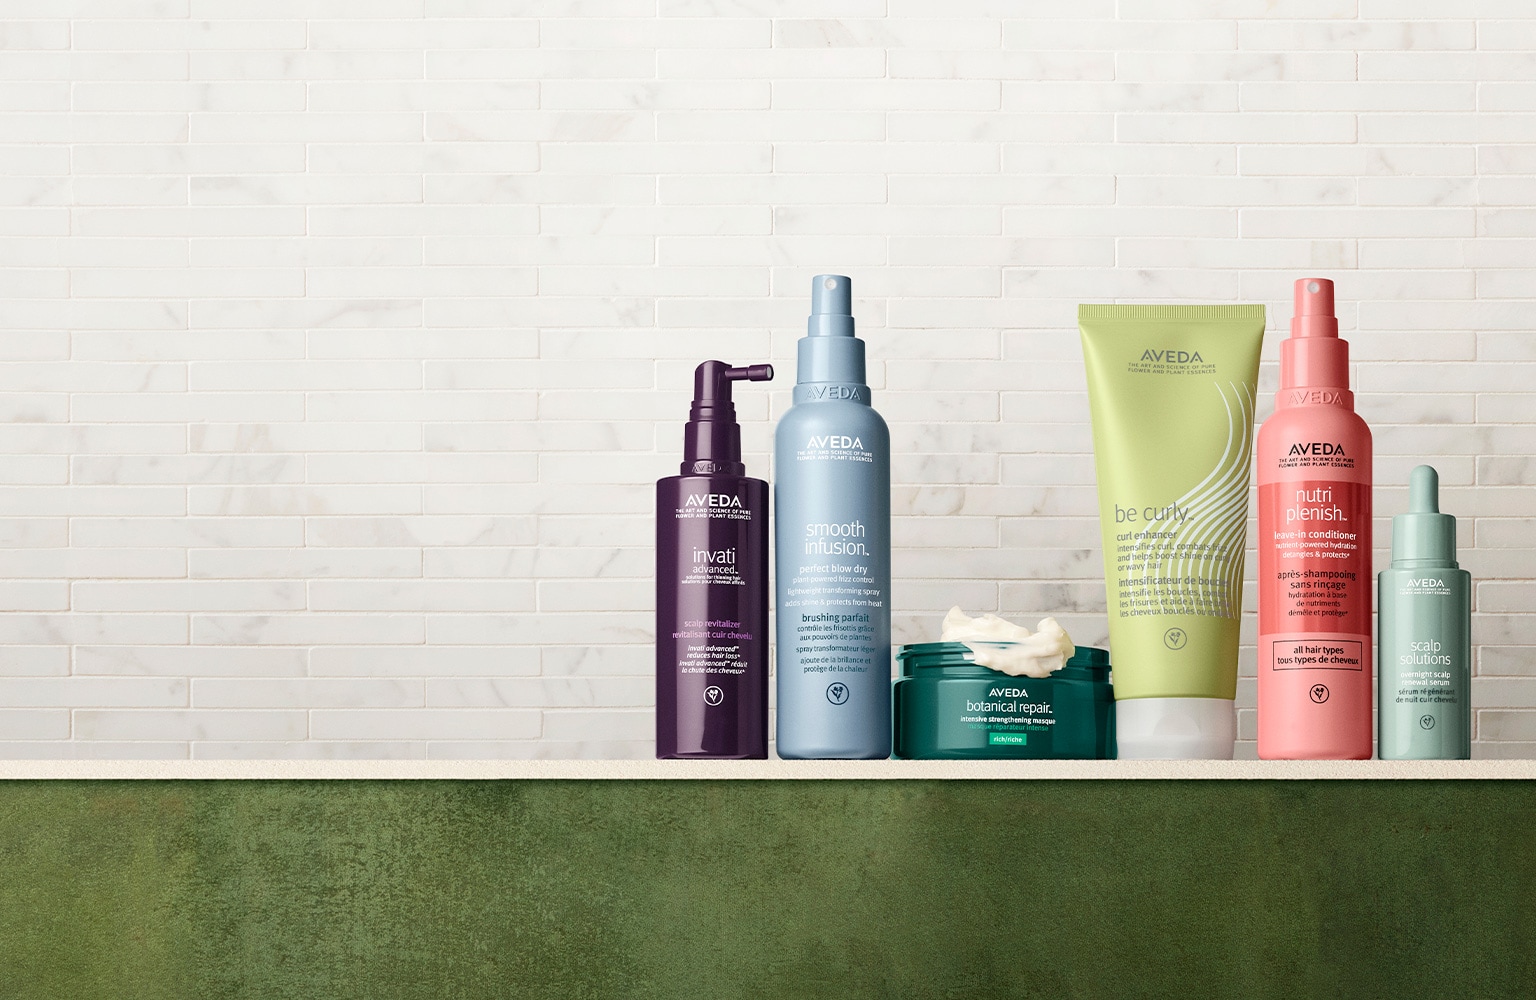 New to Aveda